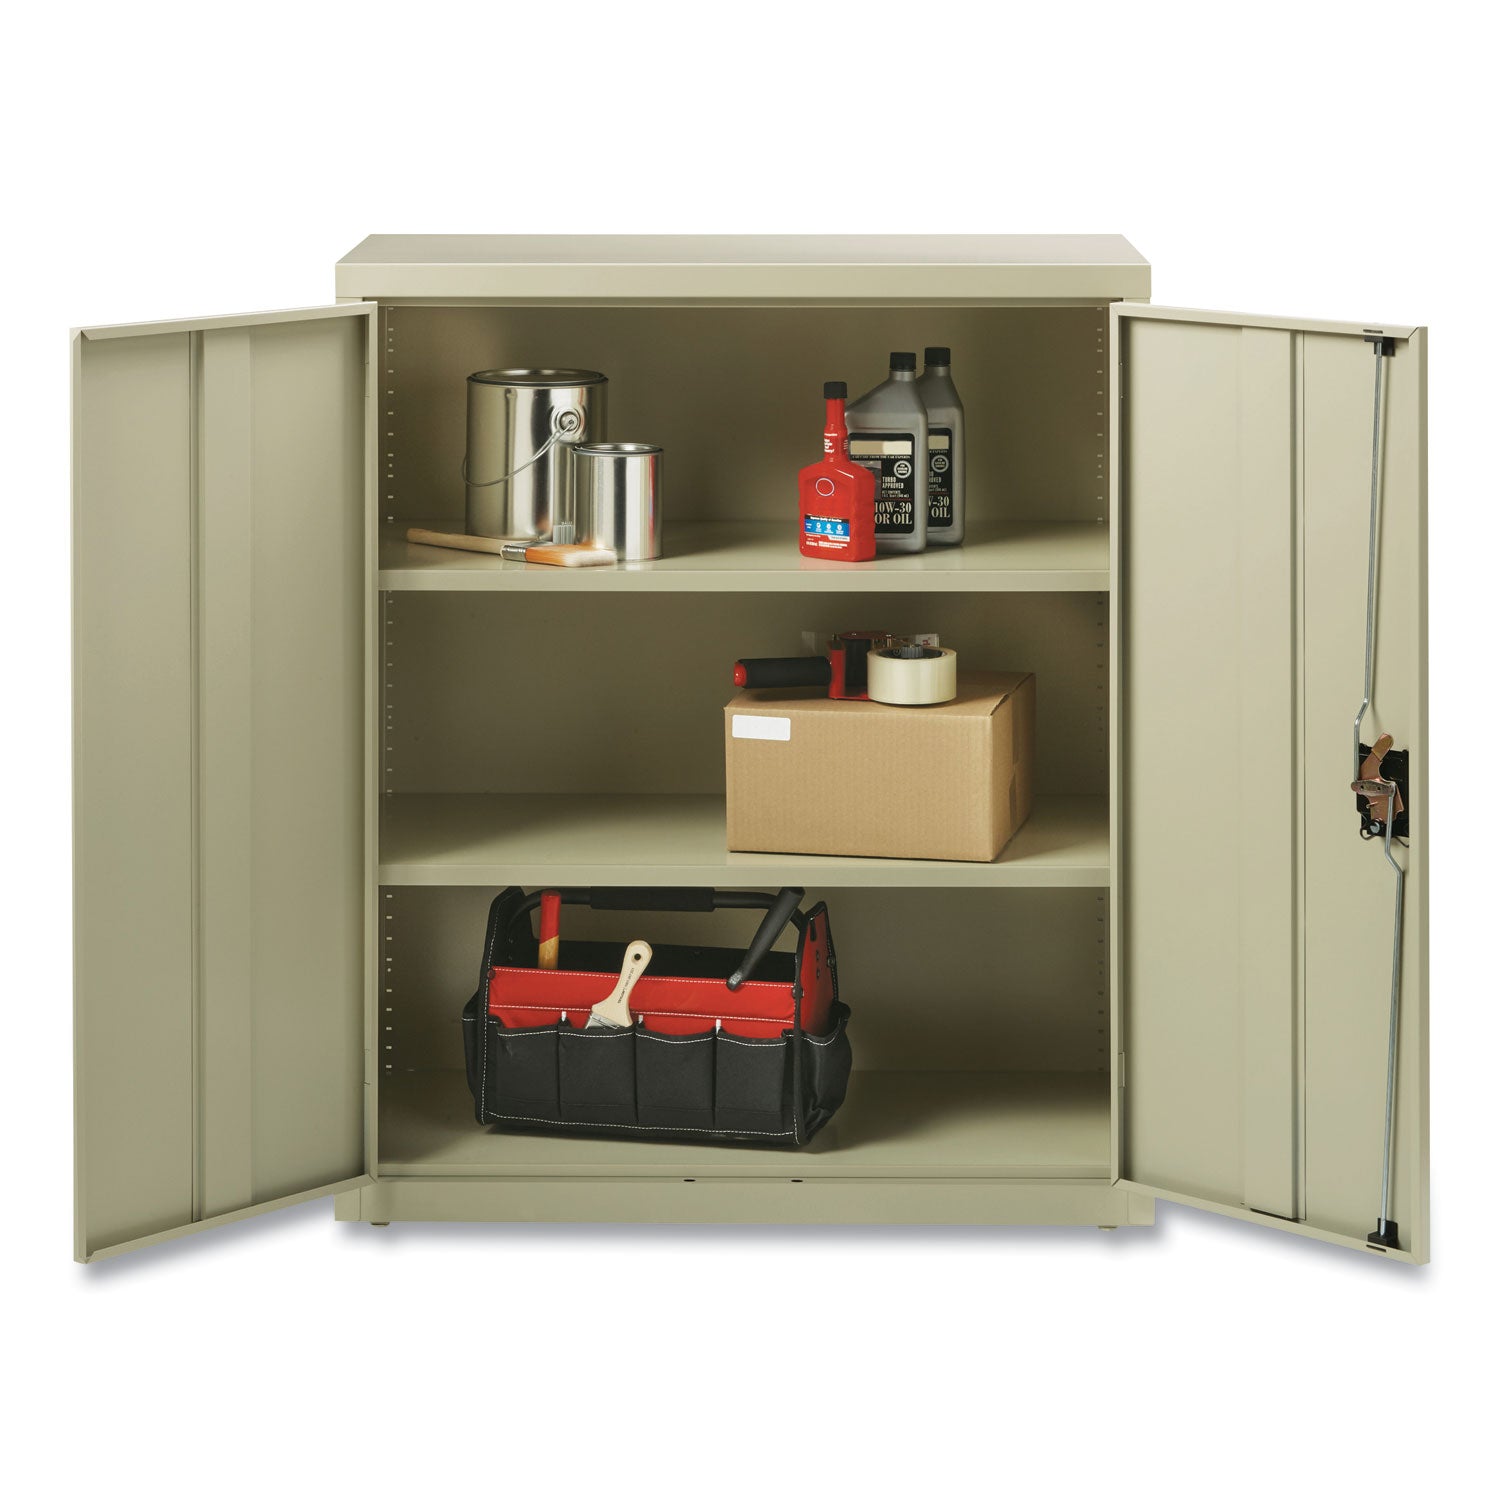 fully-assembled-storage-cabinets-3-shelves-36-x-18-x-42-putty_oifcm4218py - 8